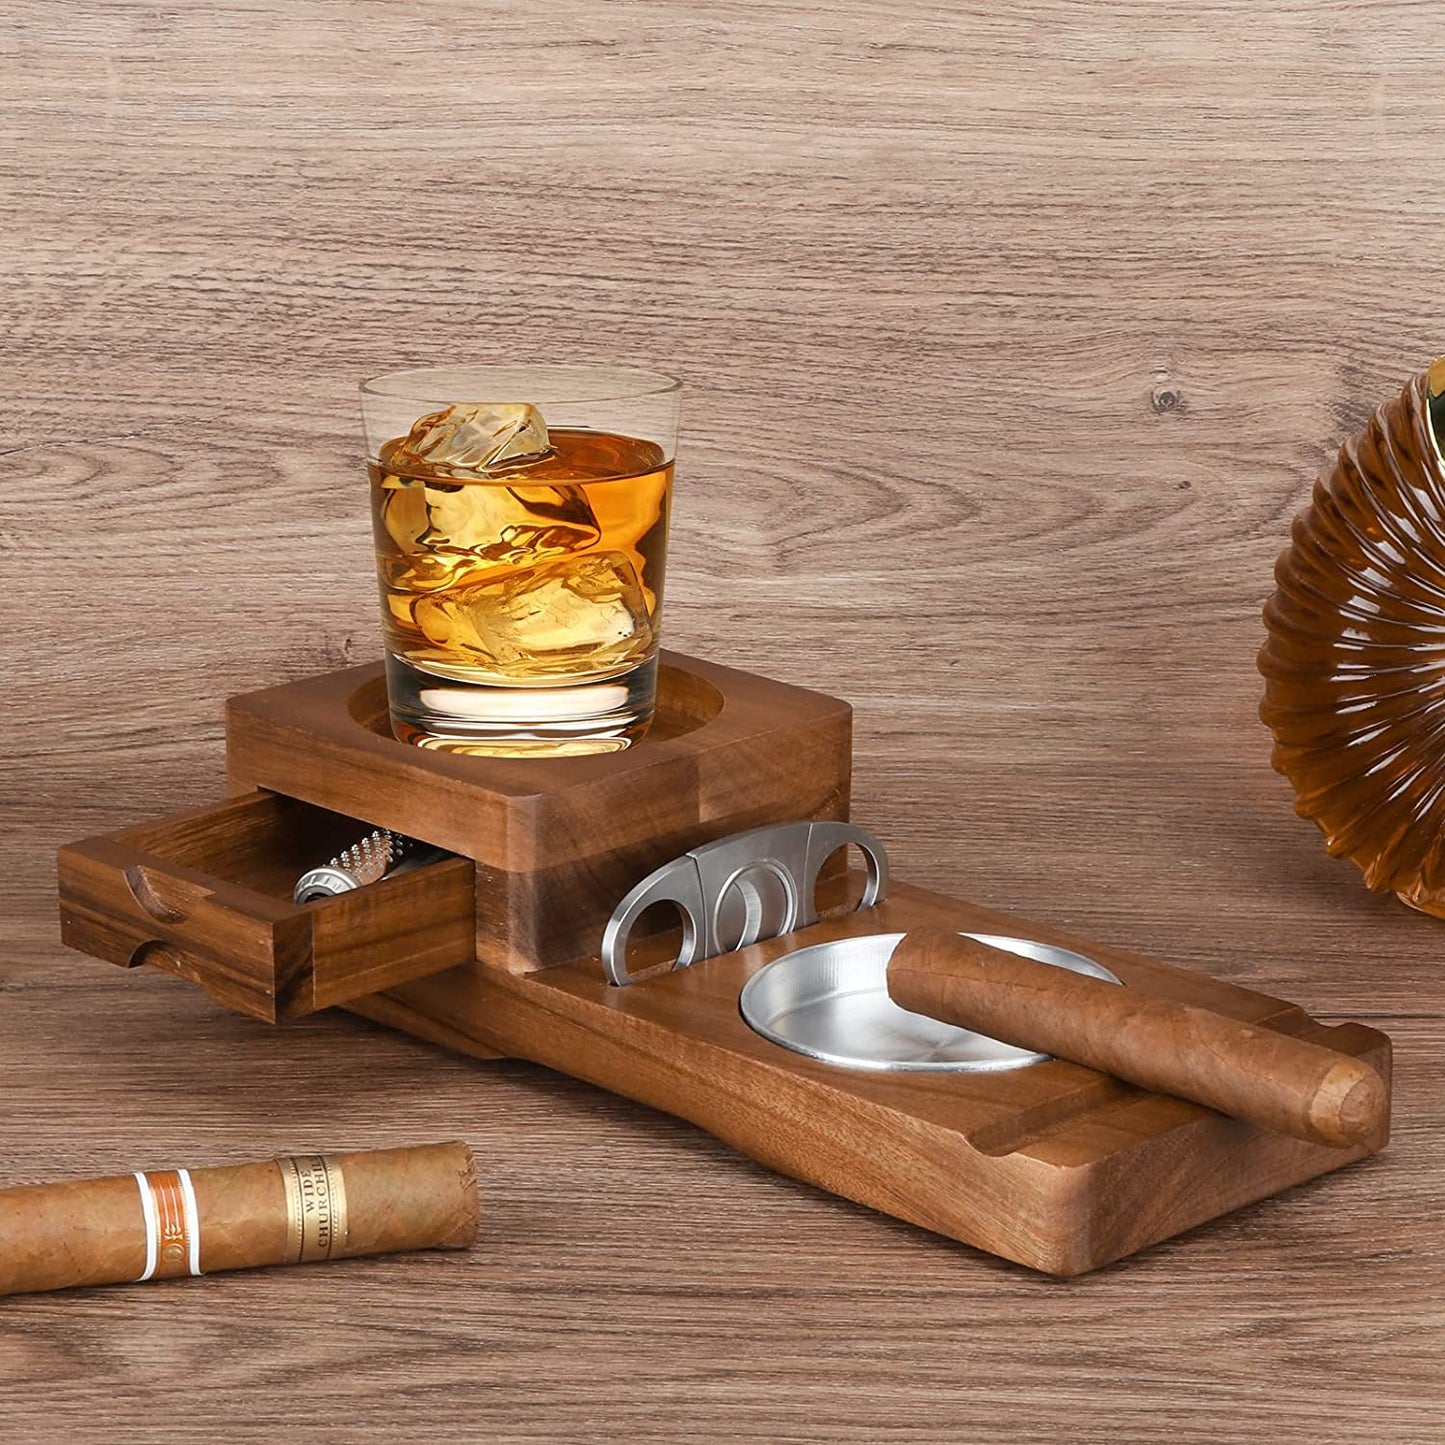 Cigar Ashtray Coaster Whiskey Glass Tray & Wooden Ash Tray with Cigar Cutter,Include Drawer and Cigar Slot Home Office Outdoor Ashtrays Great Cigar Accessories for Men